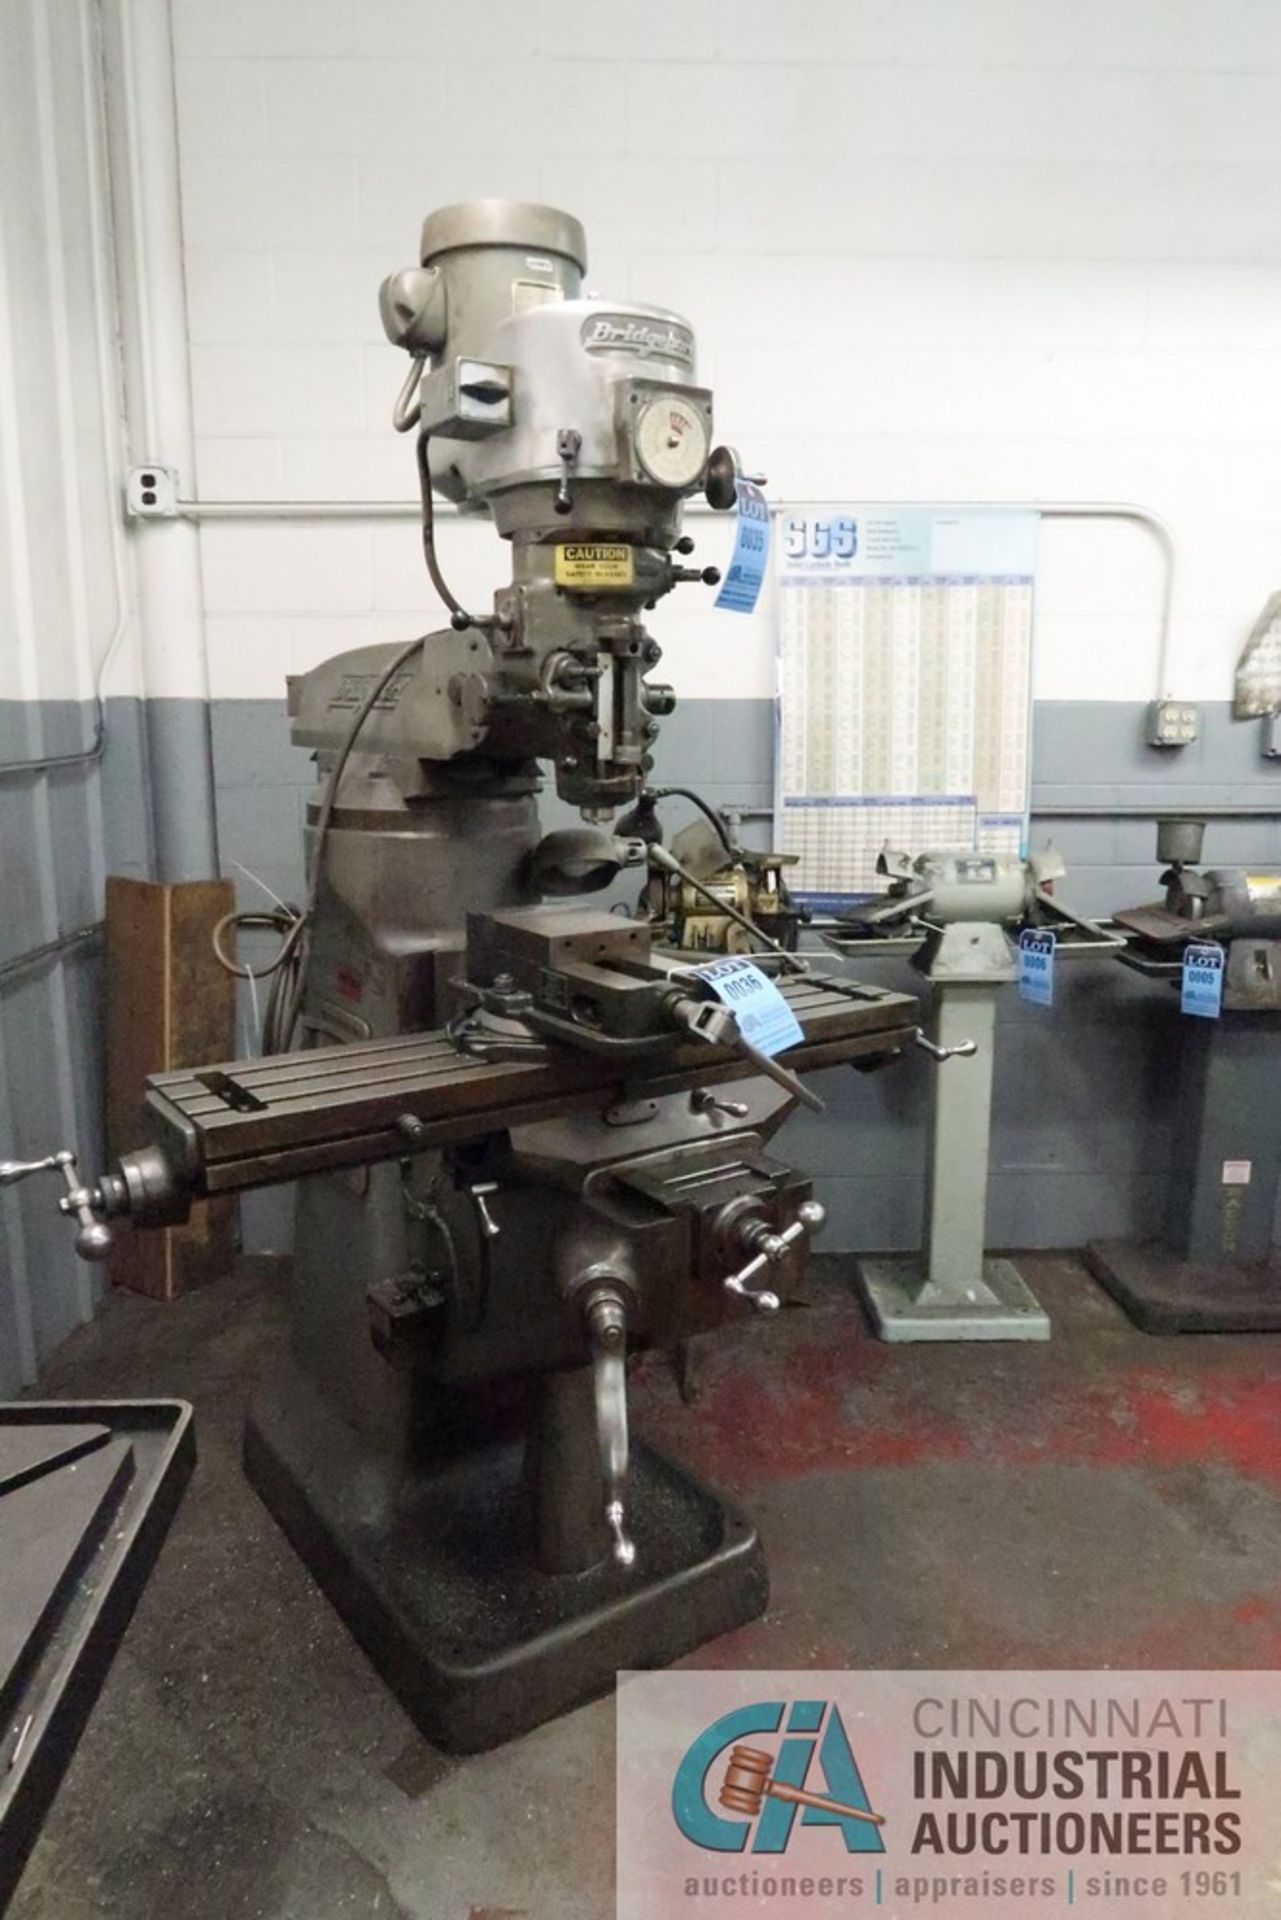 1-1/2 HP BRIDGEPORT VERTICAL MILL; S/N 129764, 9" X 42" TABLE, SPINDLE SPEED 60-4,200 RPM - Image 2 of 7